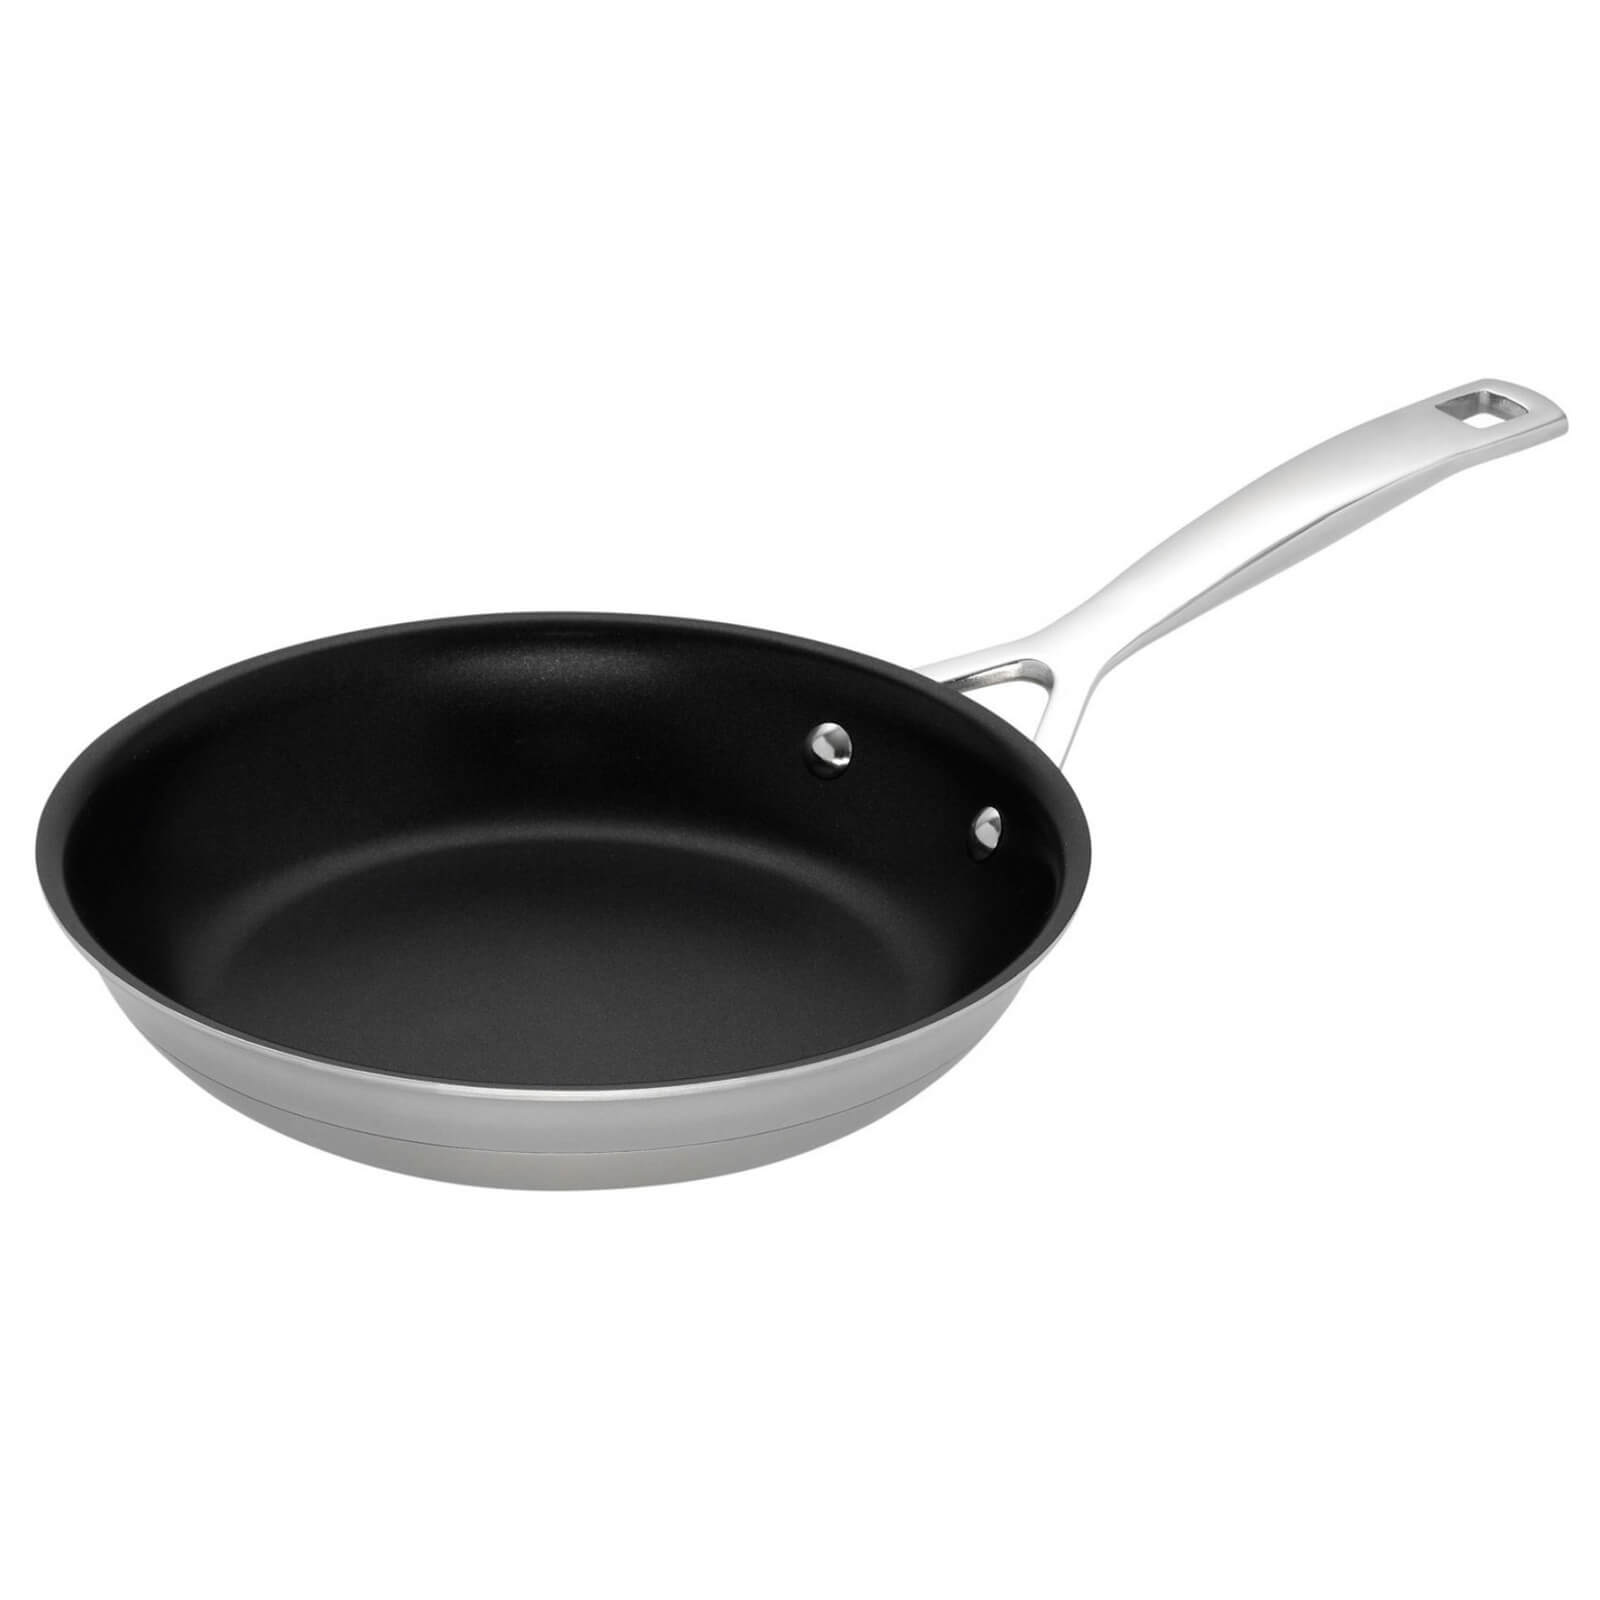 Le Creuset 3-Ply Stainless Steel Non-Stick Omelette Pan - 20cm